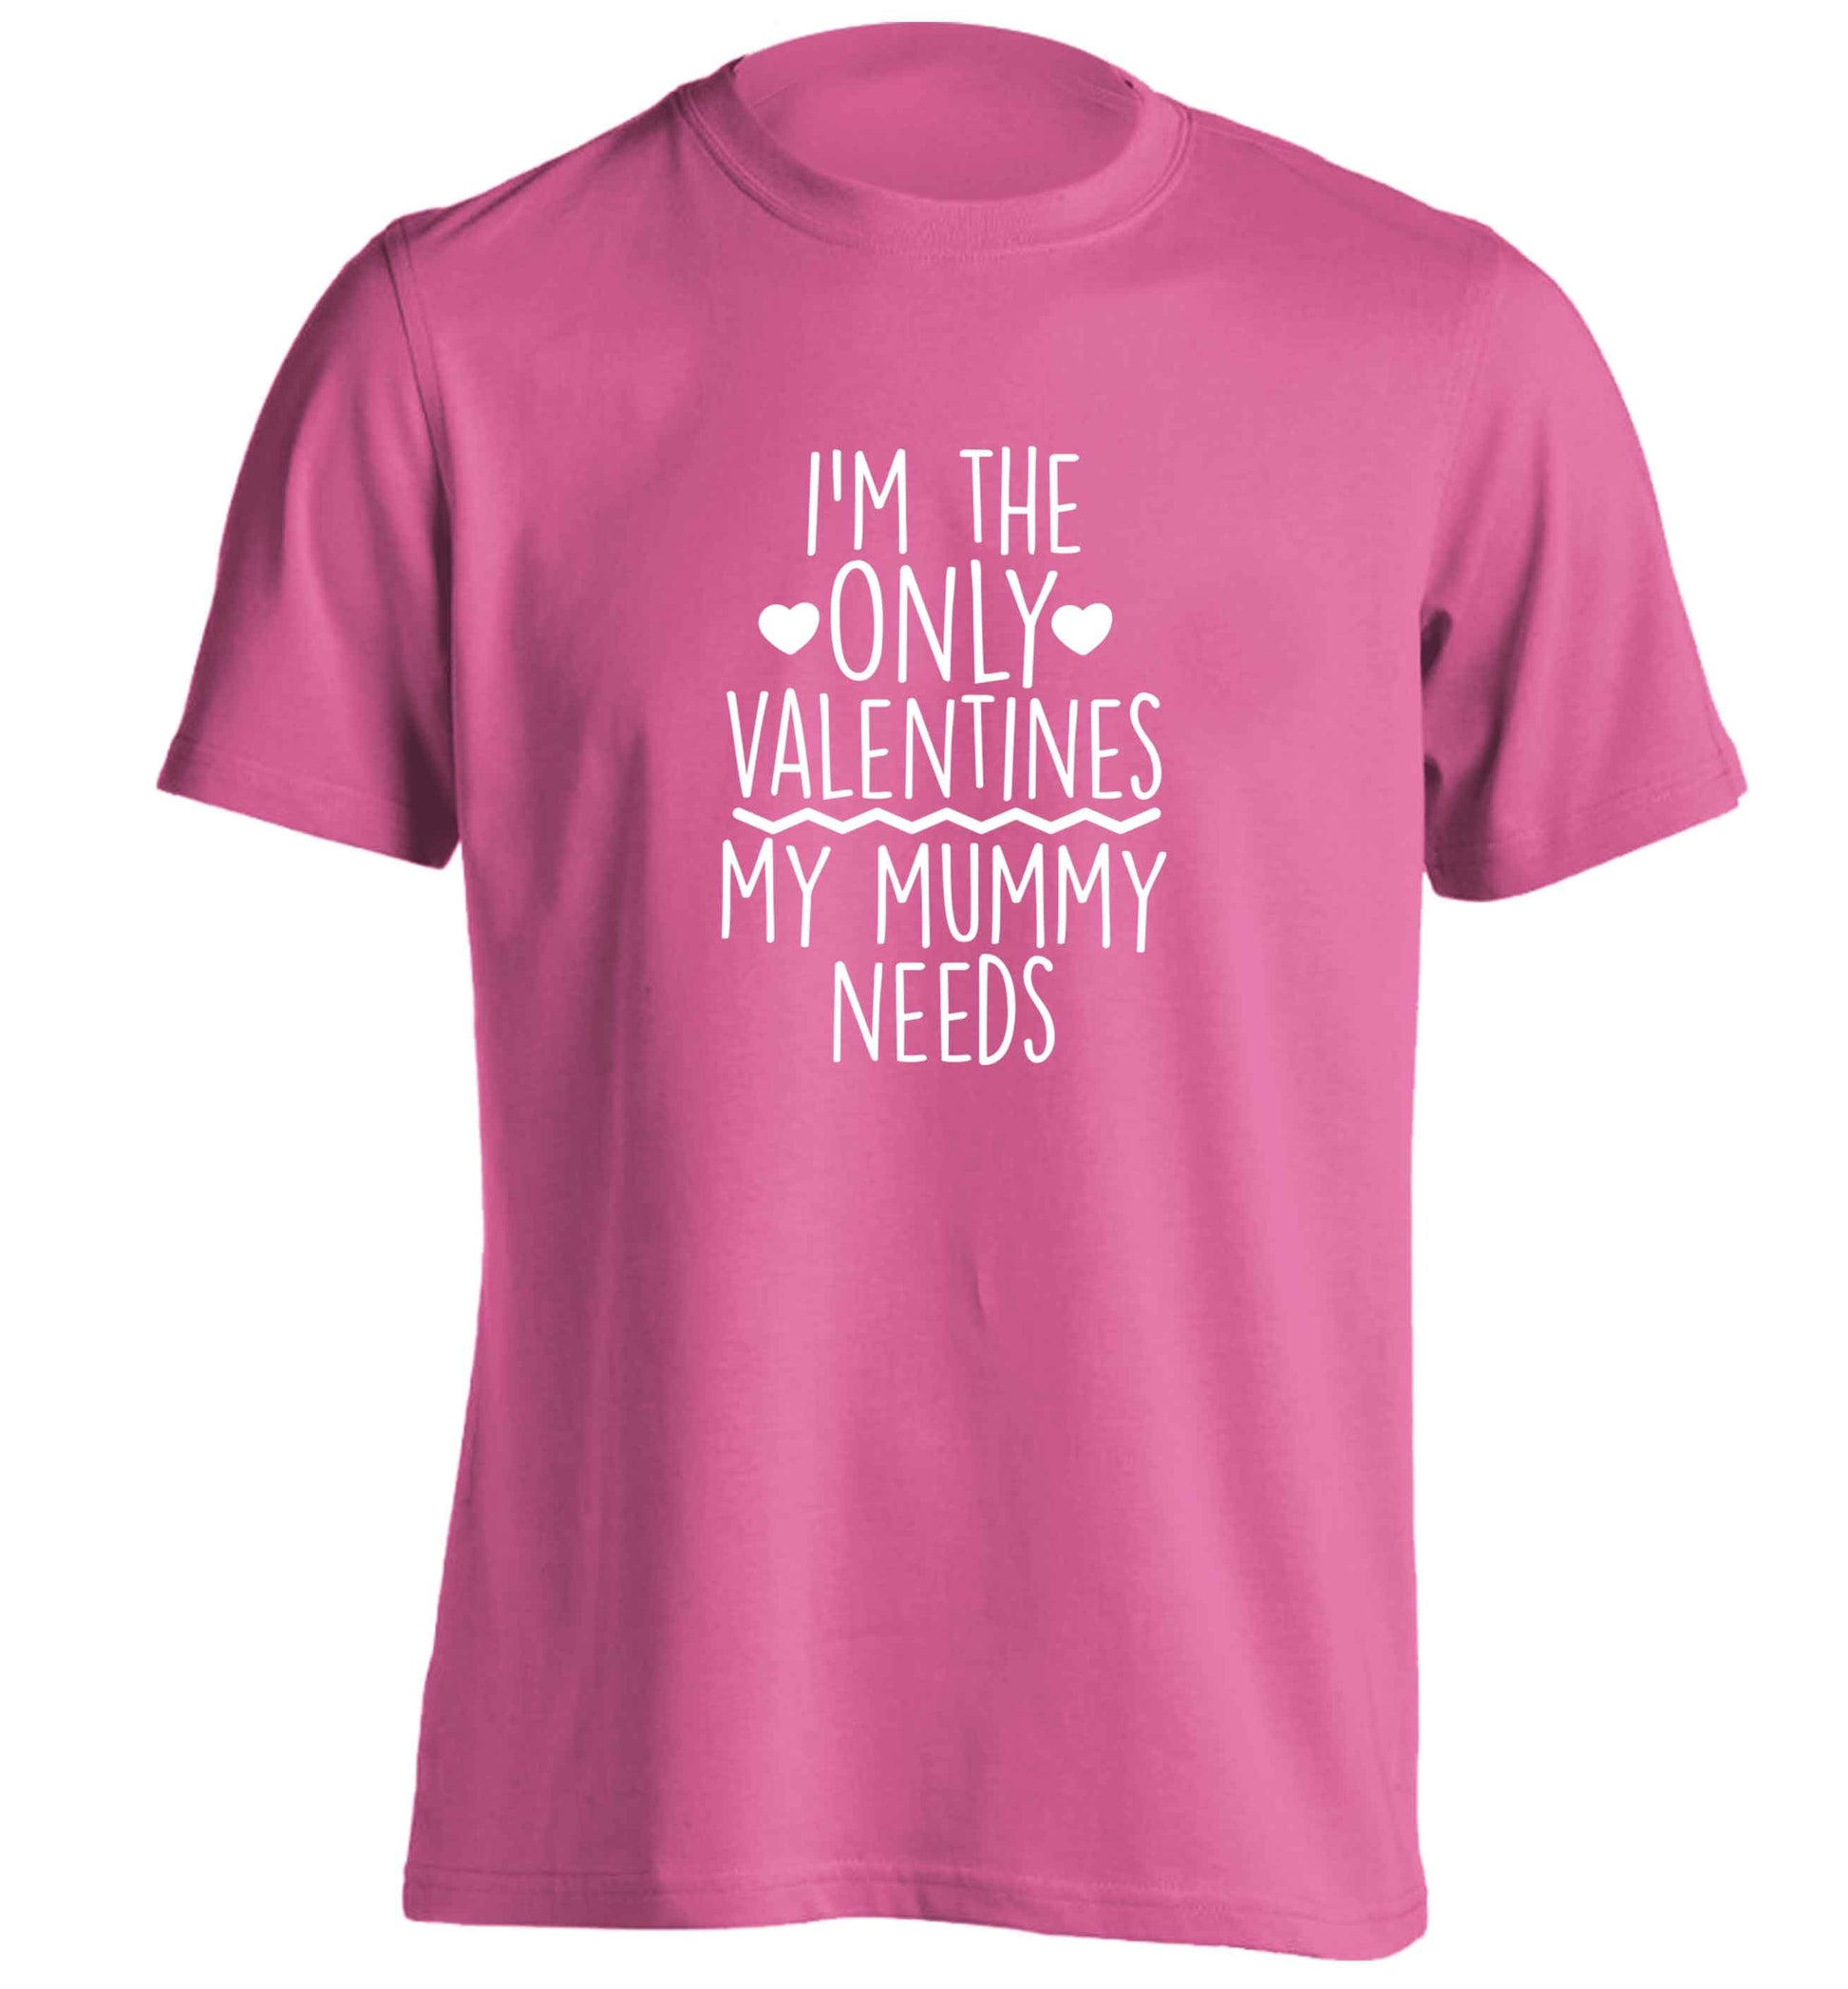 I'm the only valentines my mummy needs adults unisex pink Tshirt 2XL